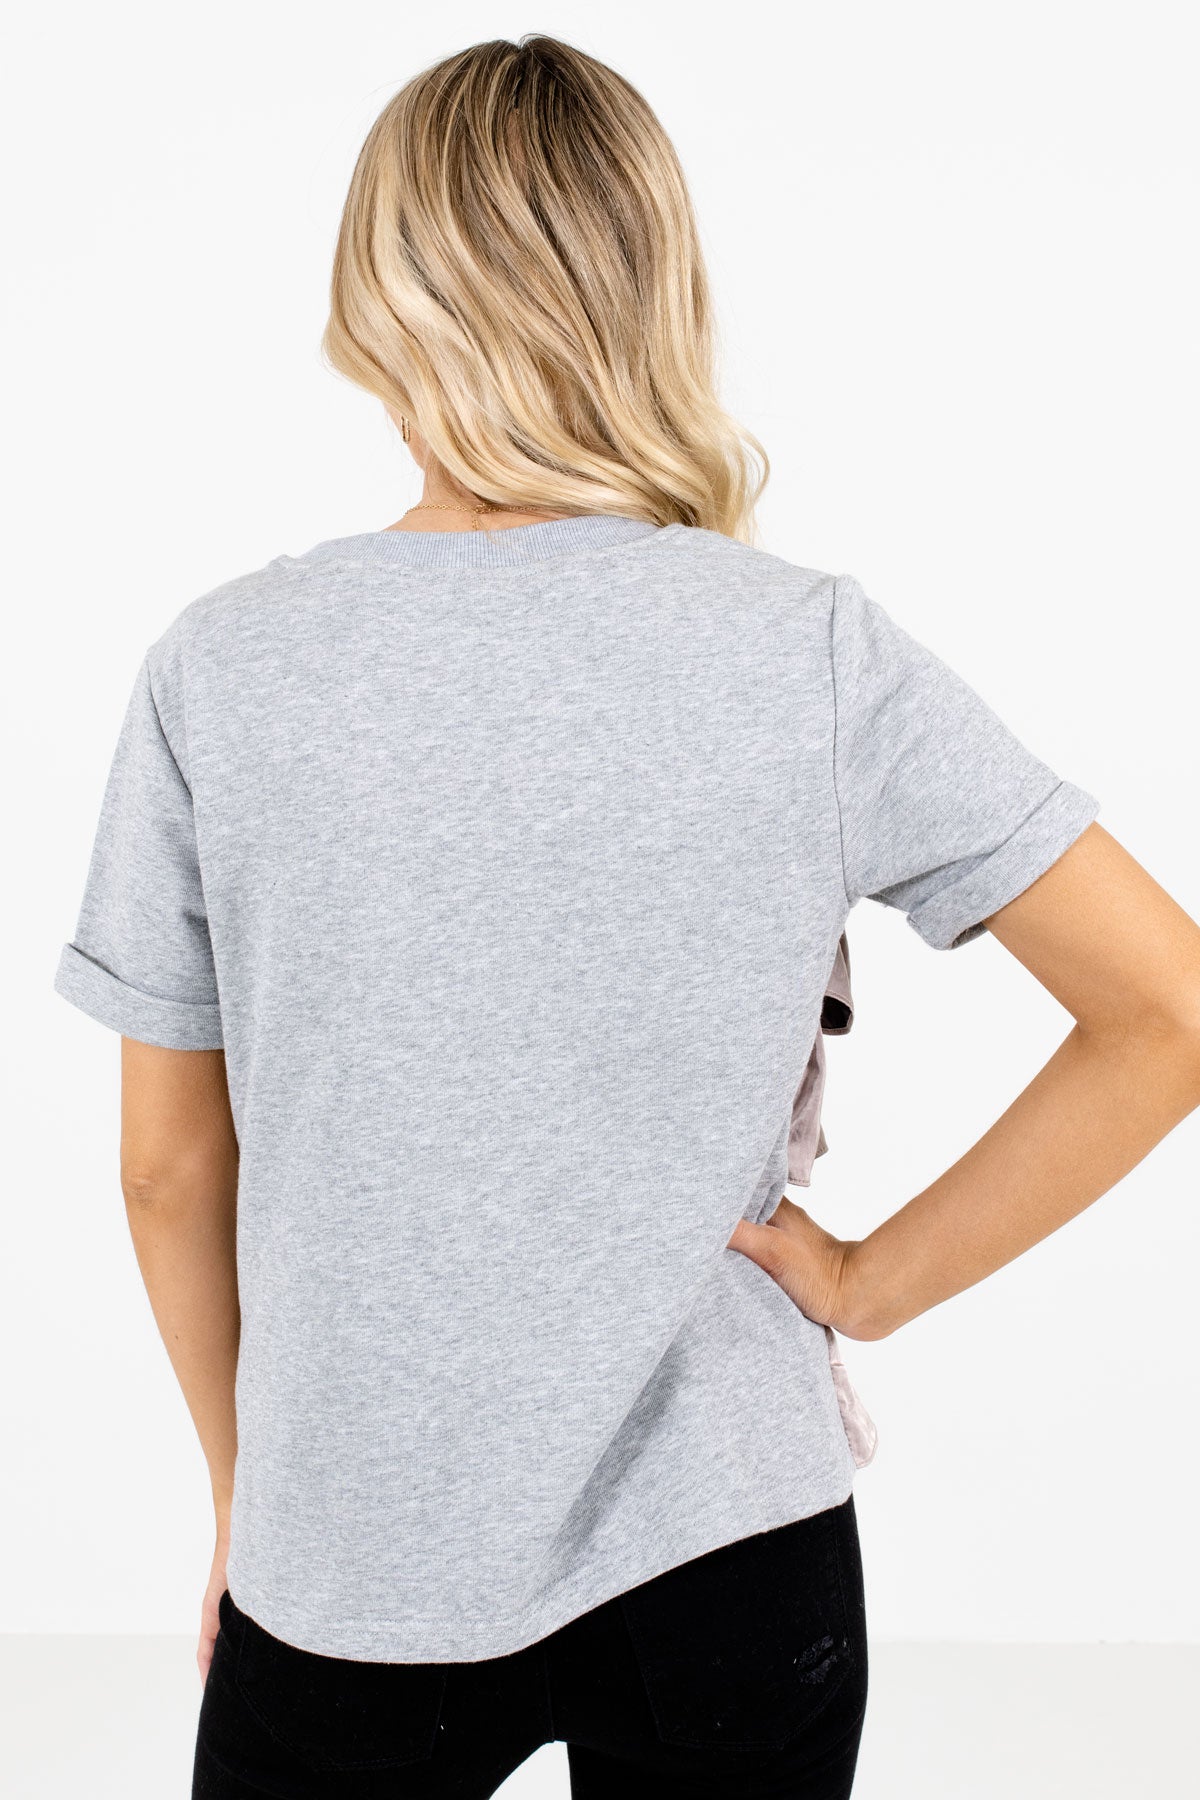 Women's Heather Gray Silky Material Boutique Tops